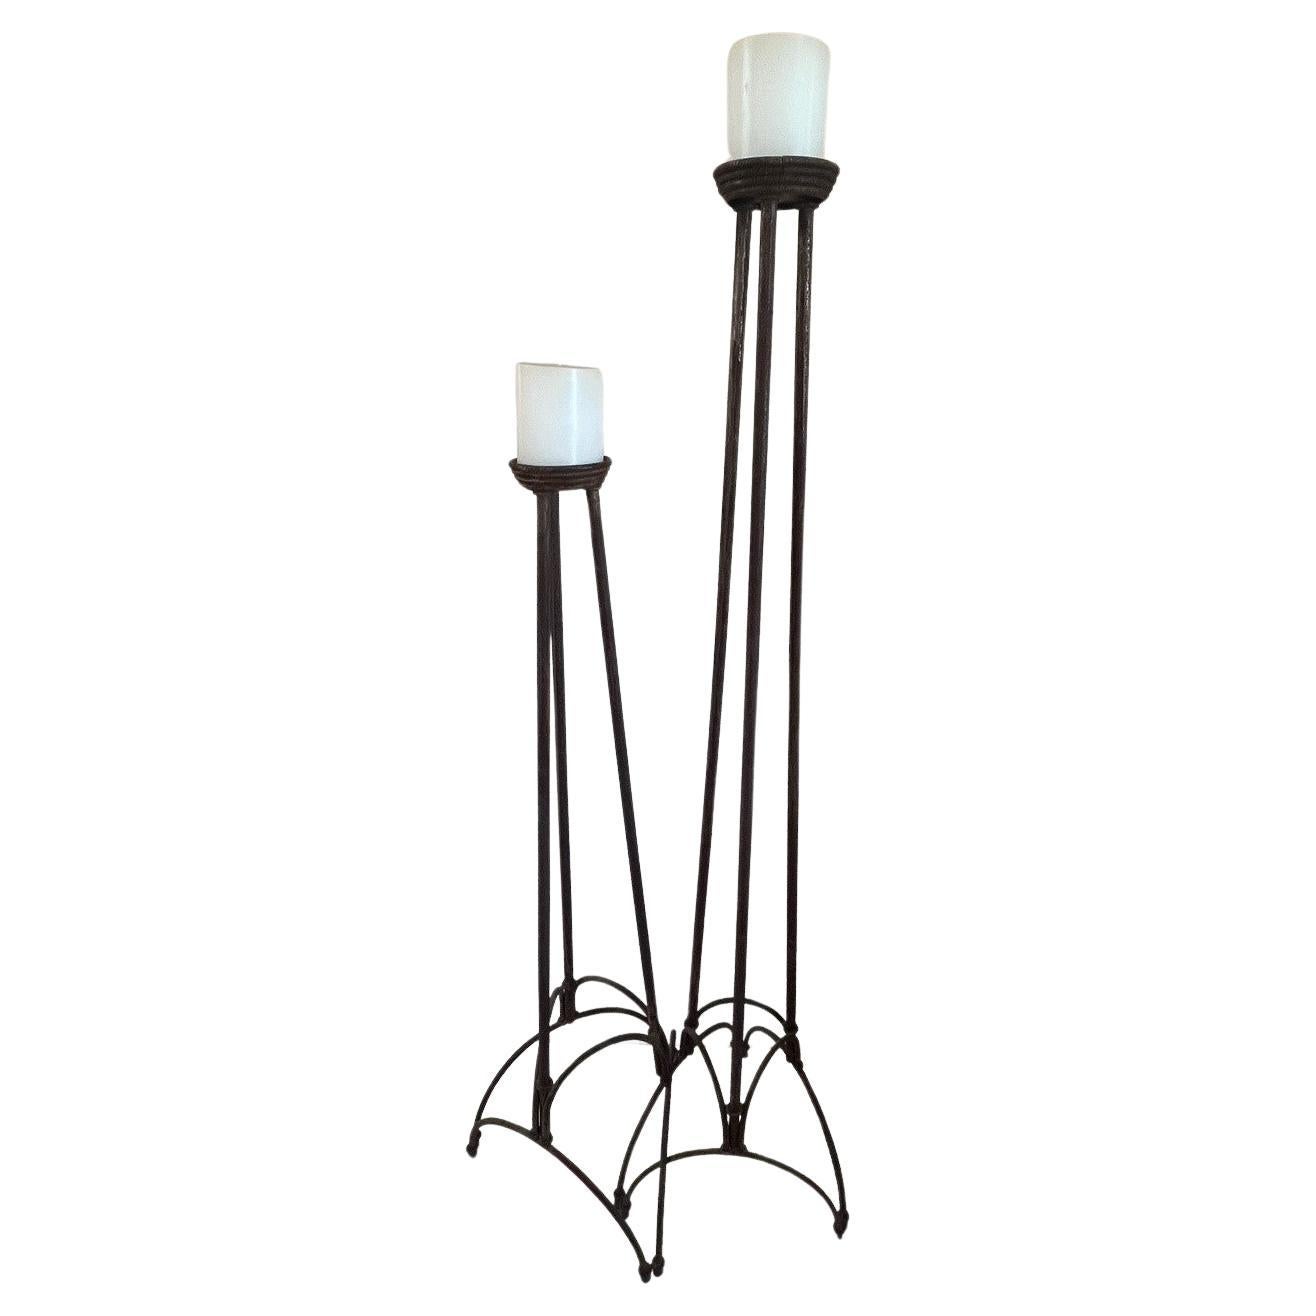 Pair of Vintage Forged Iron Floor Candleholders For Sale